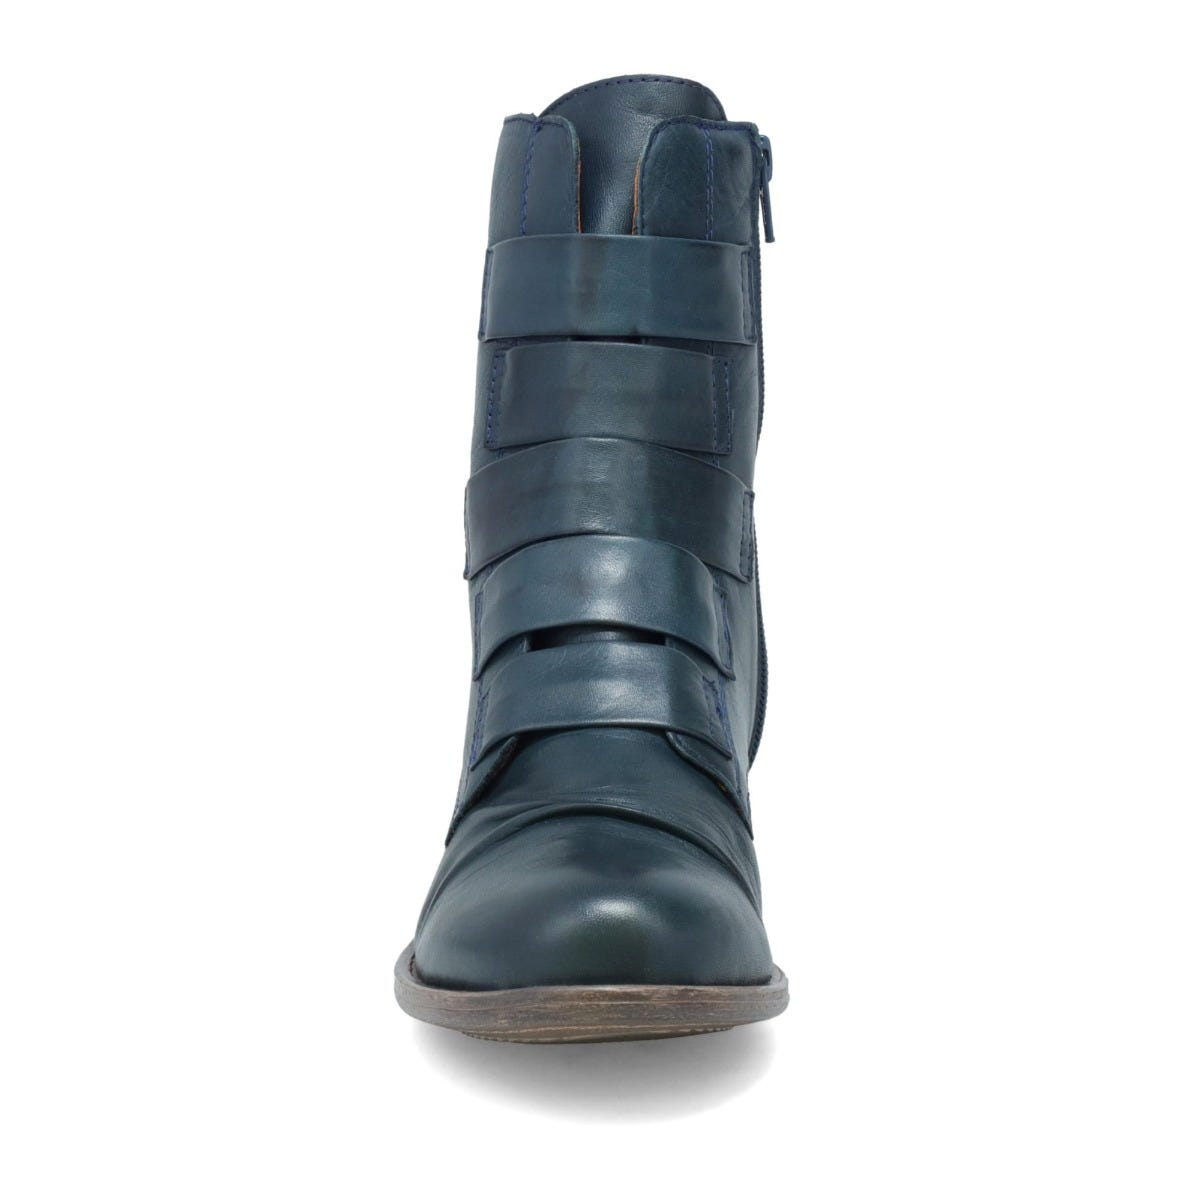 Front view of the miz mooz leighton boot. This boot is ocean (dark blue) colored. It is slightly taller than ankle height and has decorative straps all along the front.